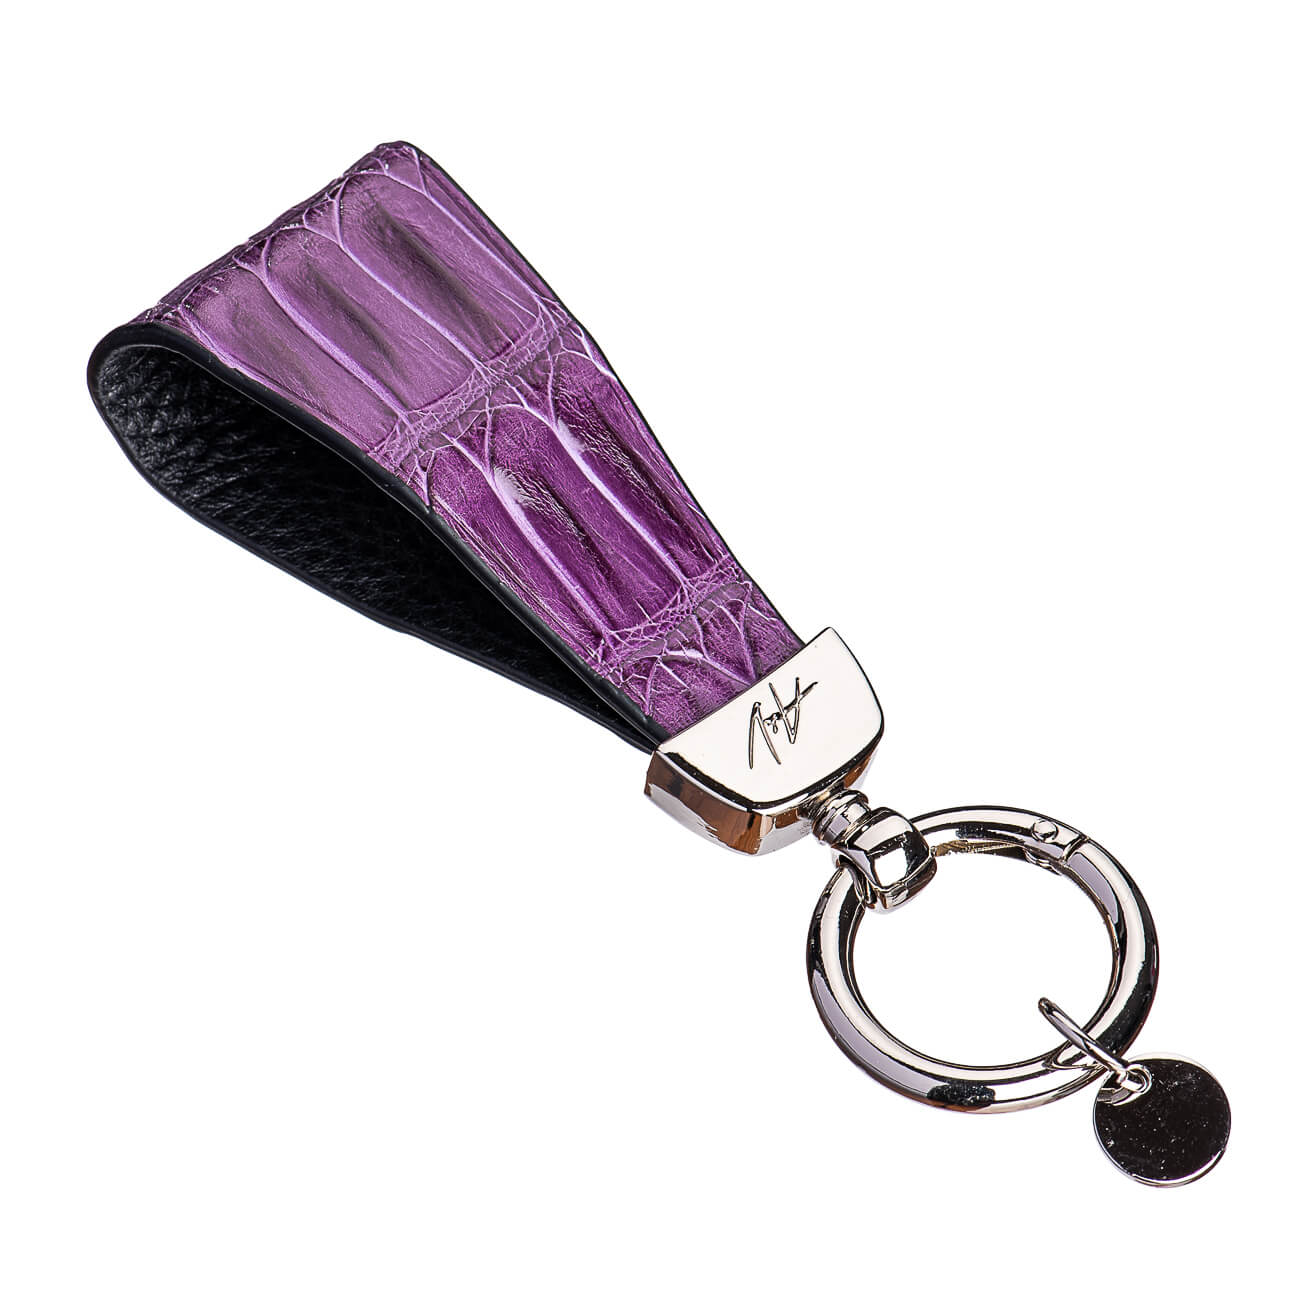 KEYCHAIN MOON CHARMED VIOLET